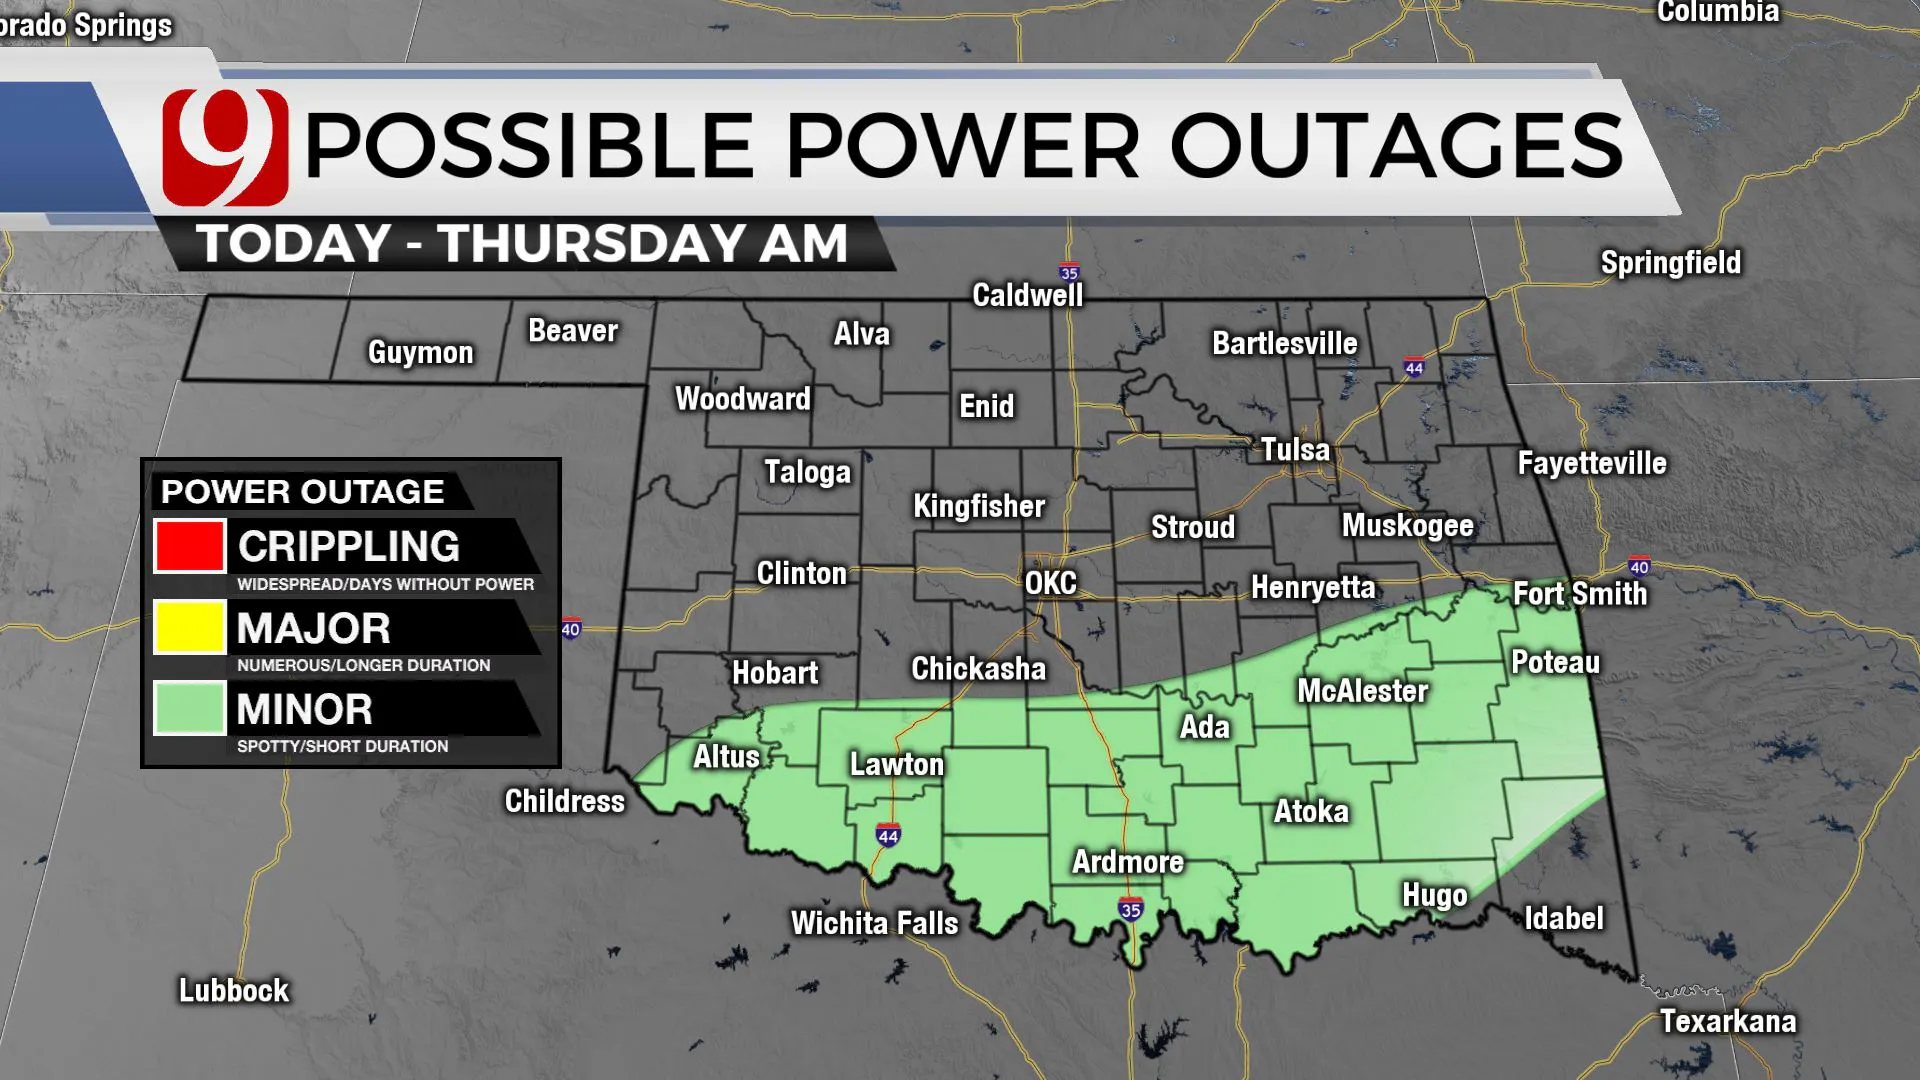 Possible power outages across the state.